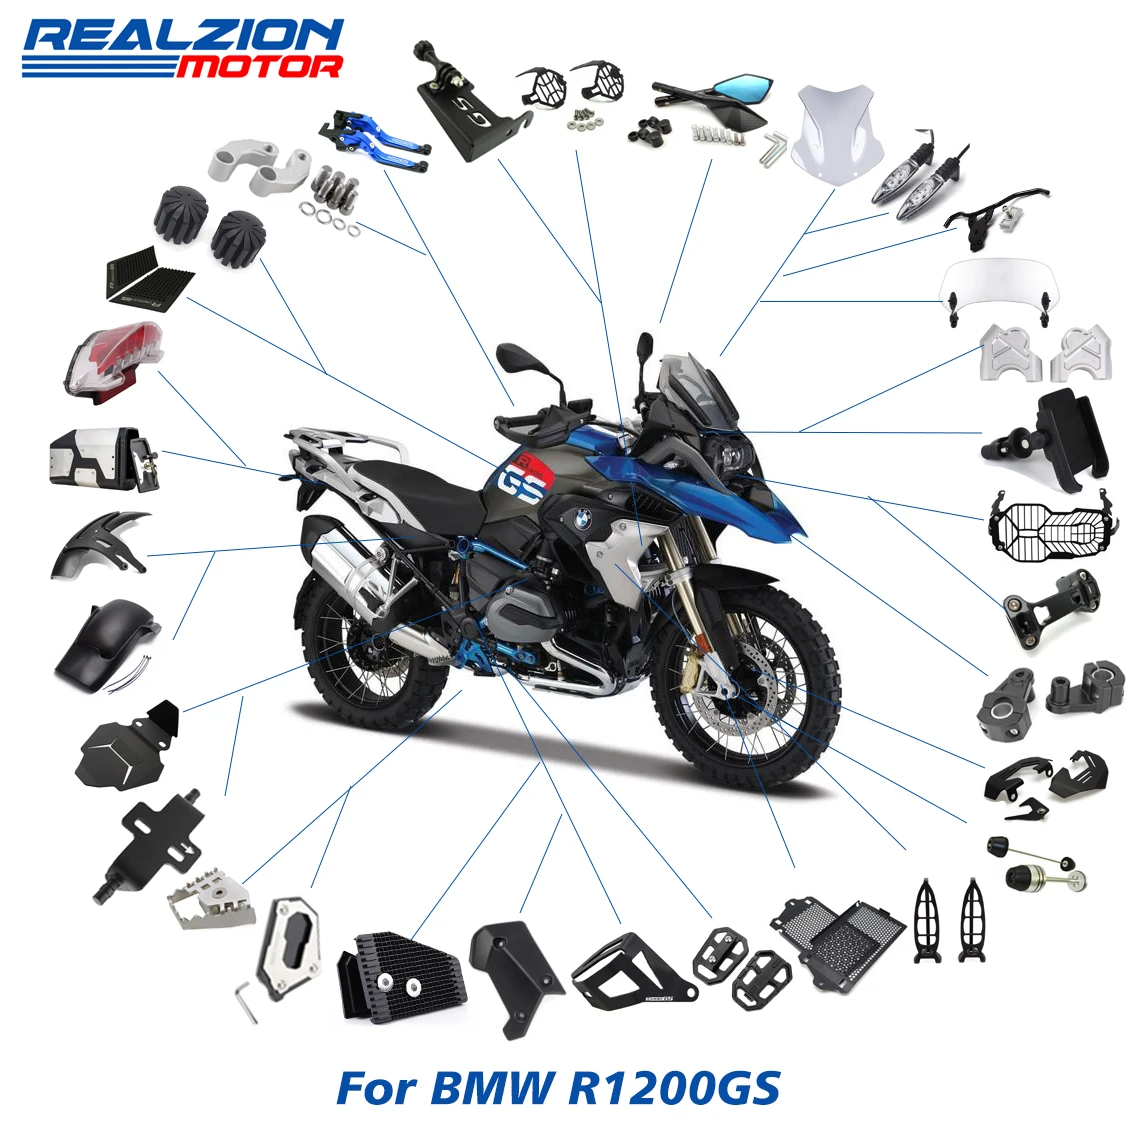 forskellige Skulle talsmand Wholesale Realzion Motorcycle Accessories CNC Exquisite Processing Parts  For BMW S1000R S1000RR GS310 K1600GT R1200GS R1250 From m.alibaba.com